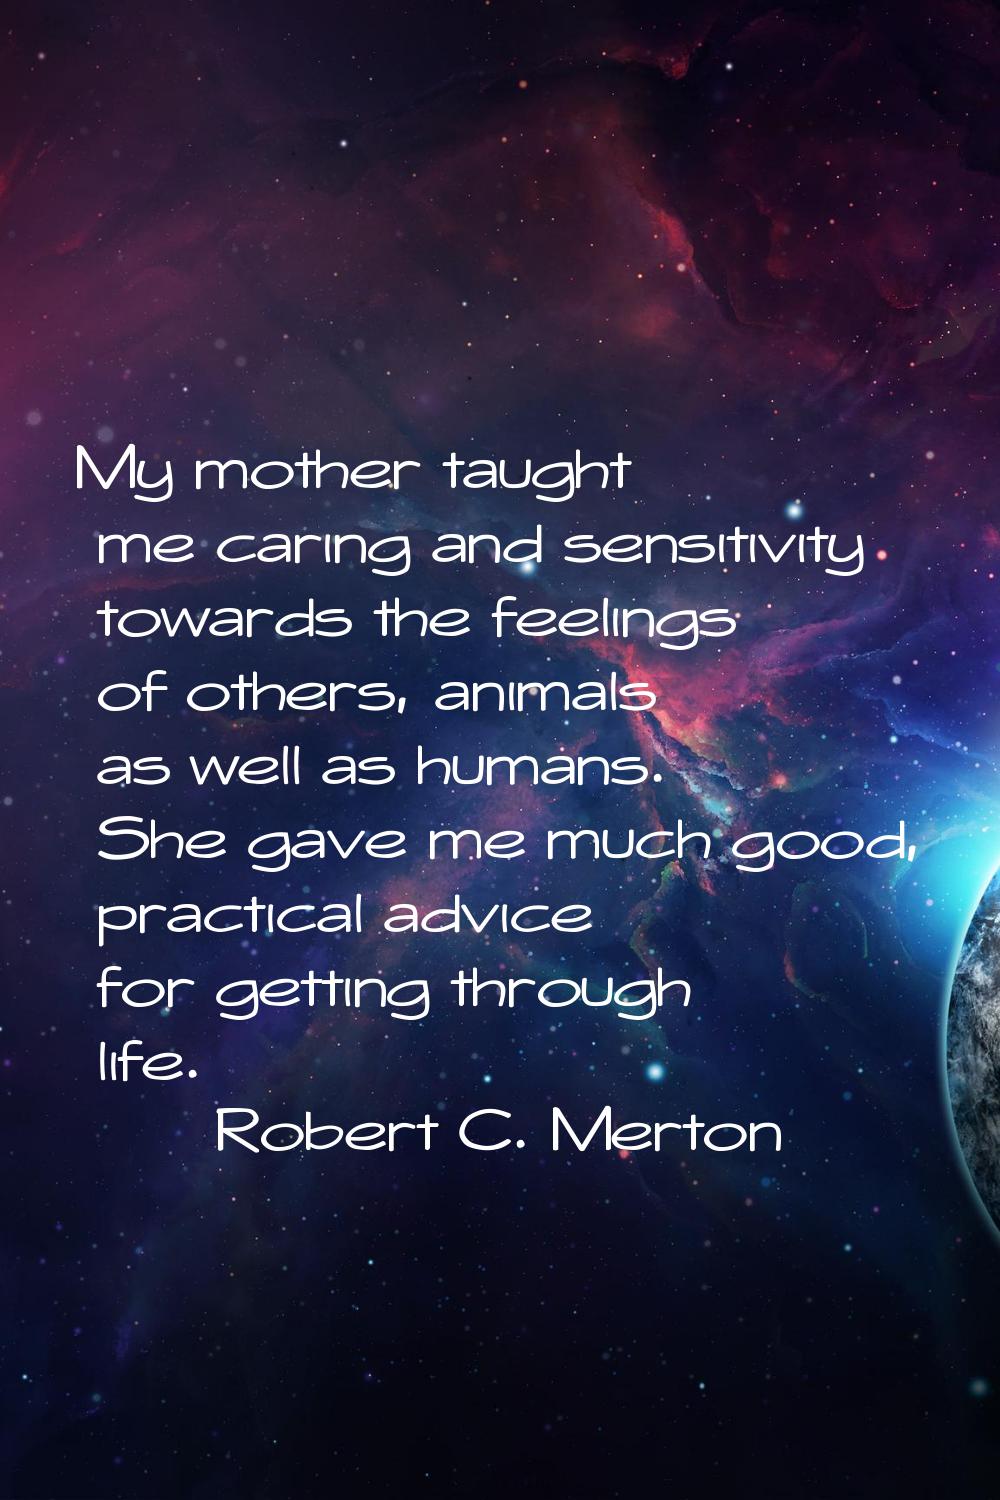 My mother taught me caring and sensitivity towards the feelings of others, animals as well as human